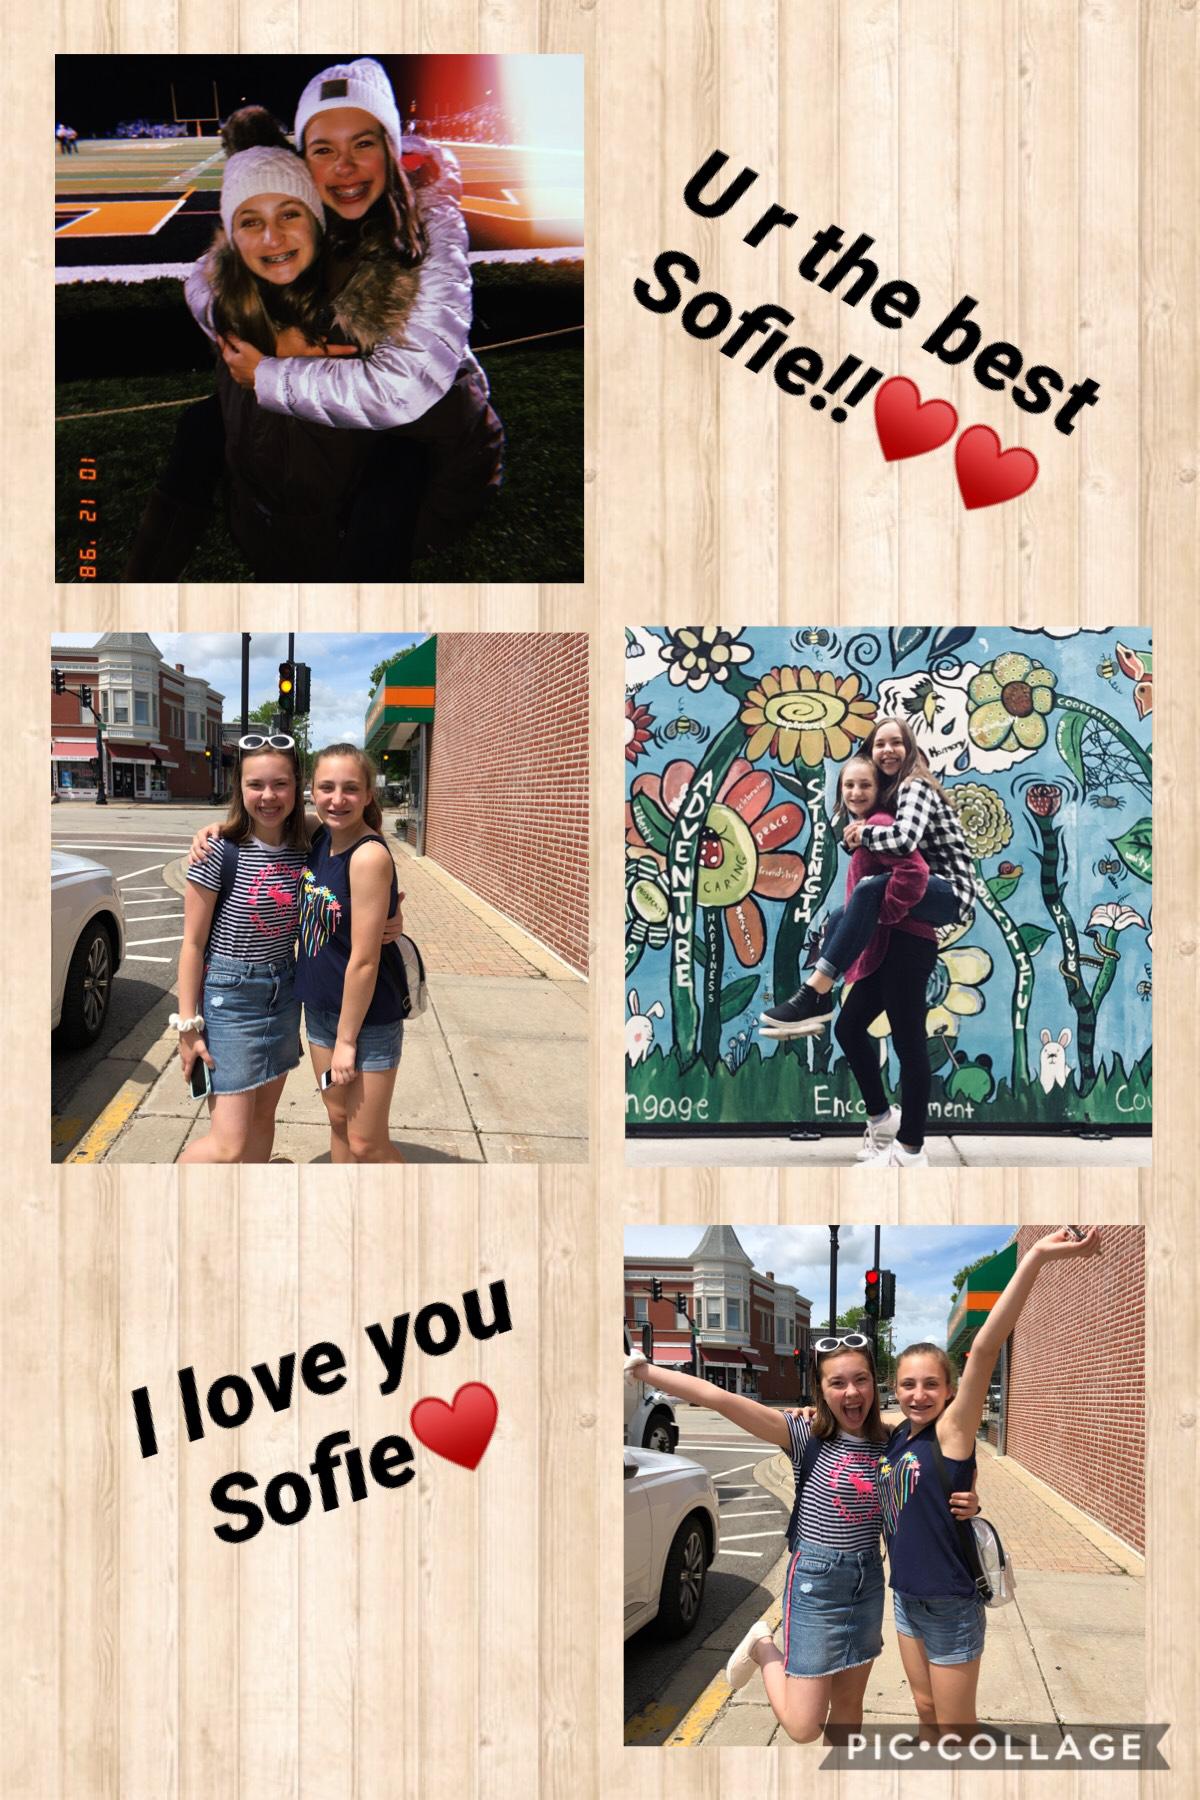 Tap the ♥️

I love you Sofie! Even though this year has given us some ups and downs, we have managed to stay friends. I love you Sofie♥️♥️